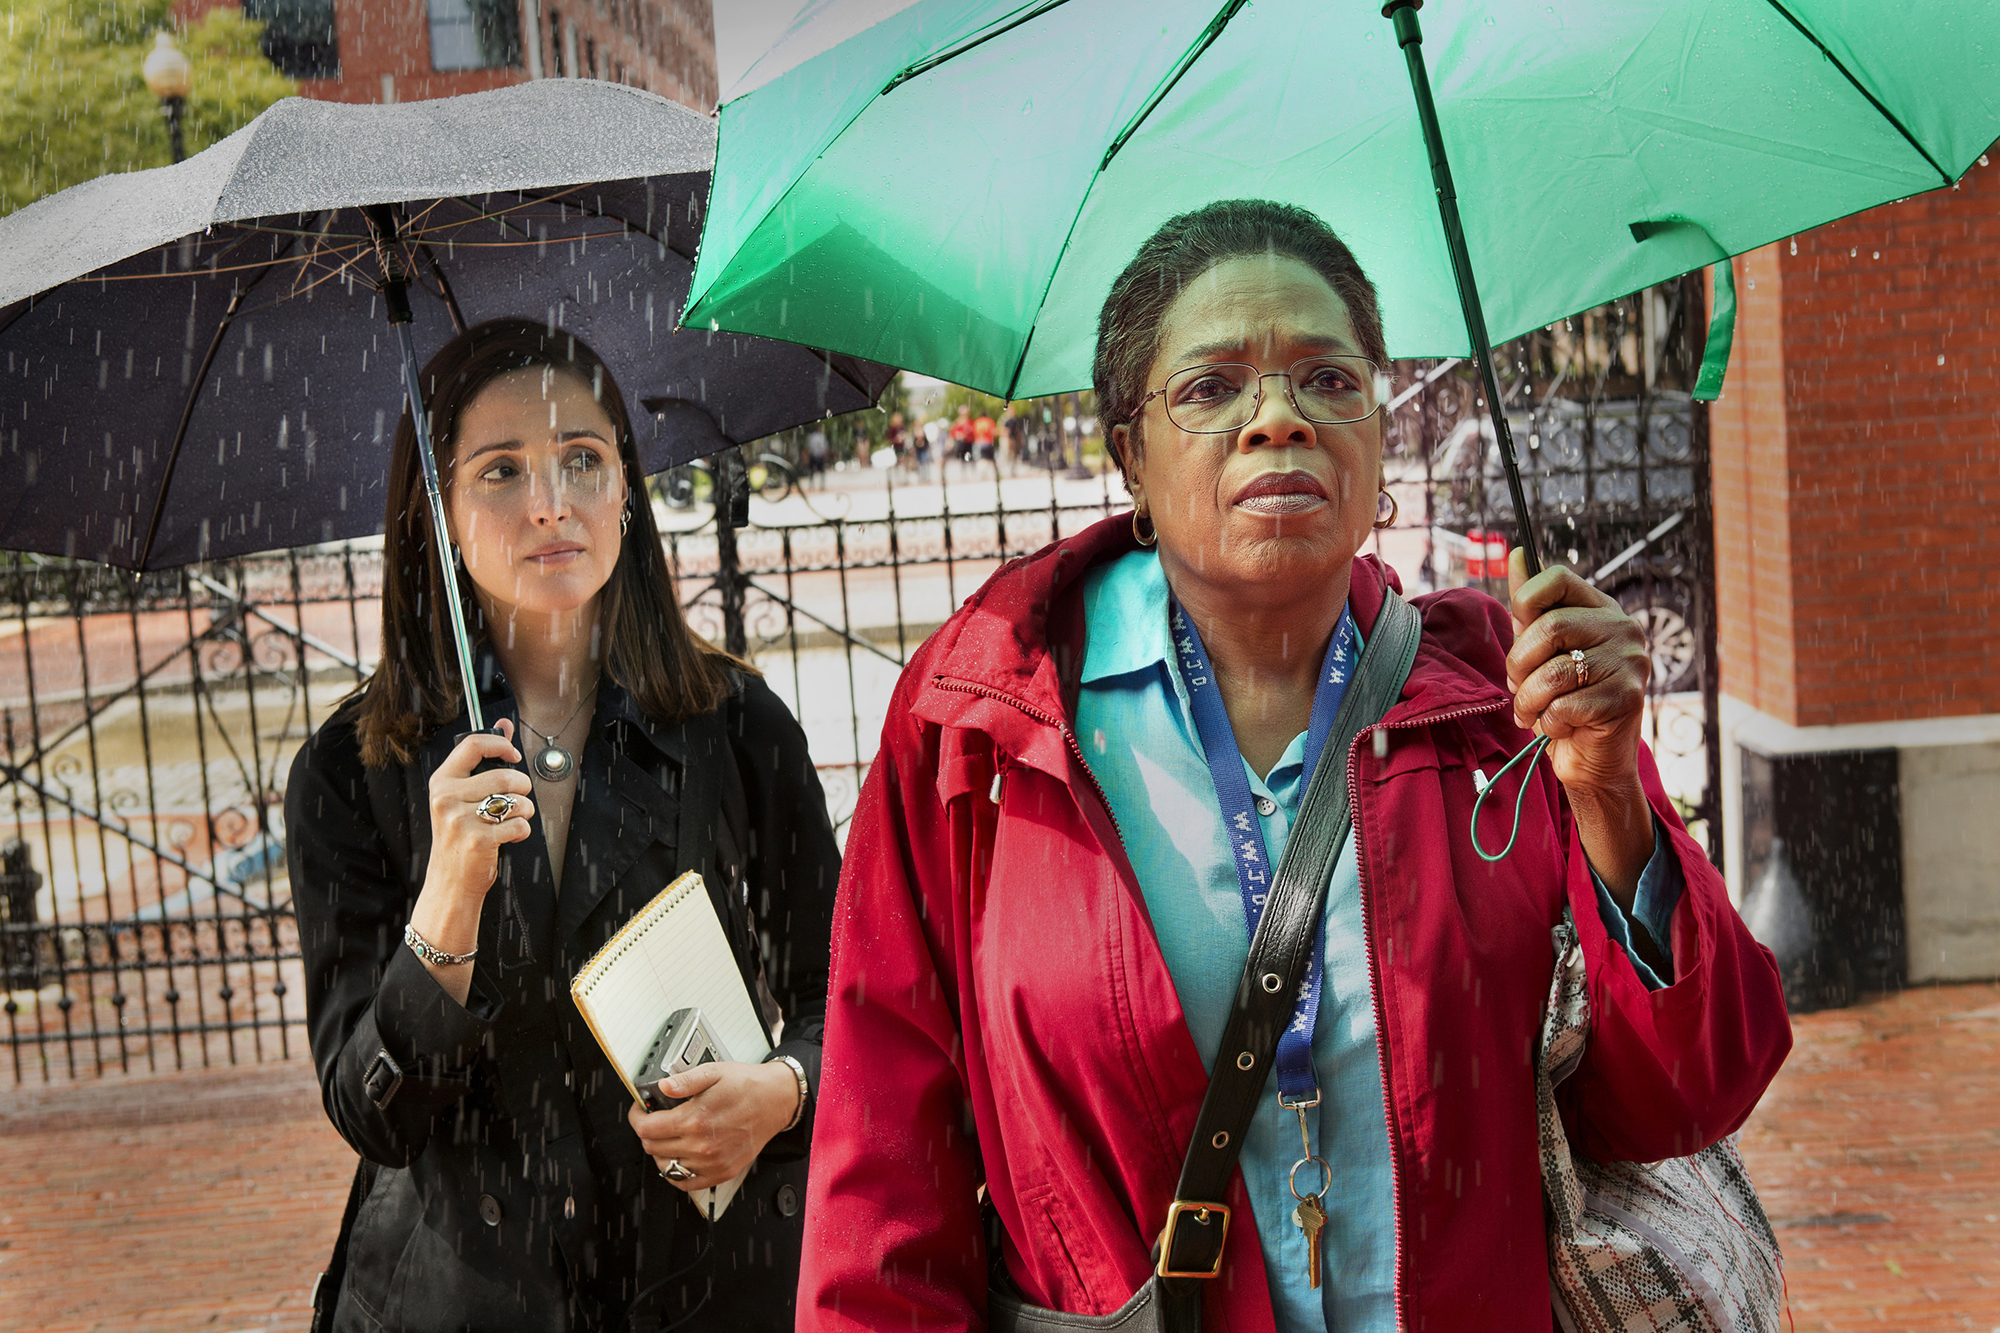 Rose Byrne and Oprah Winfrey in The Immortal Life of Henrietta Lacks.